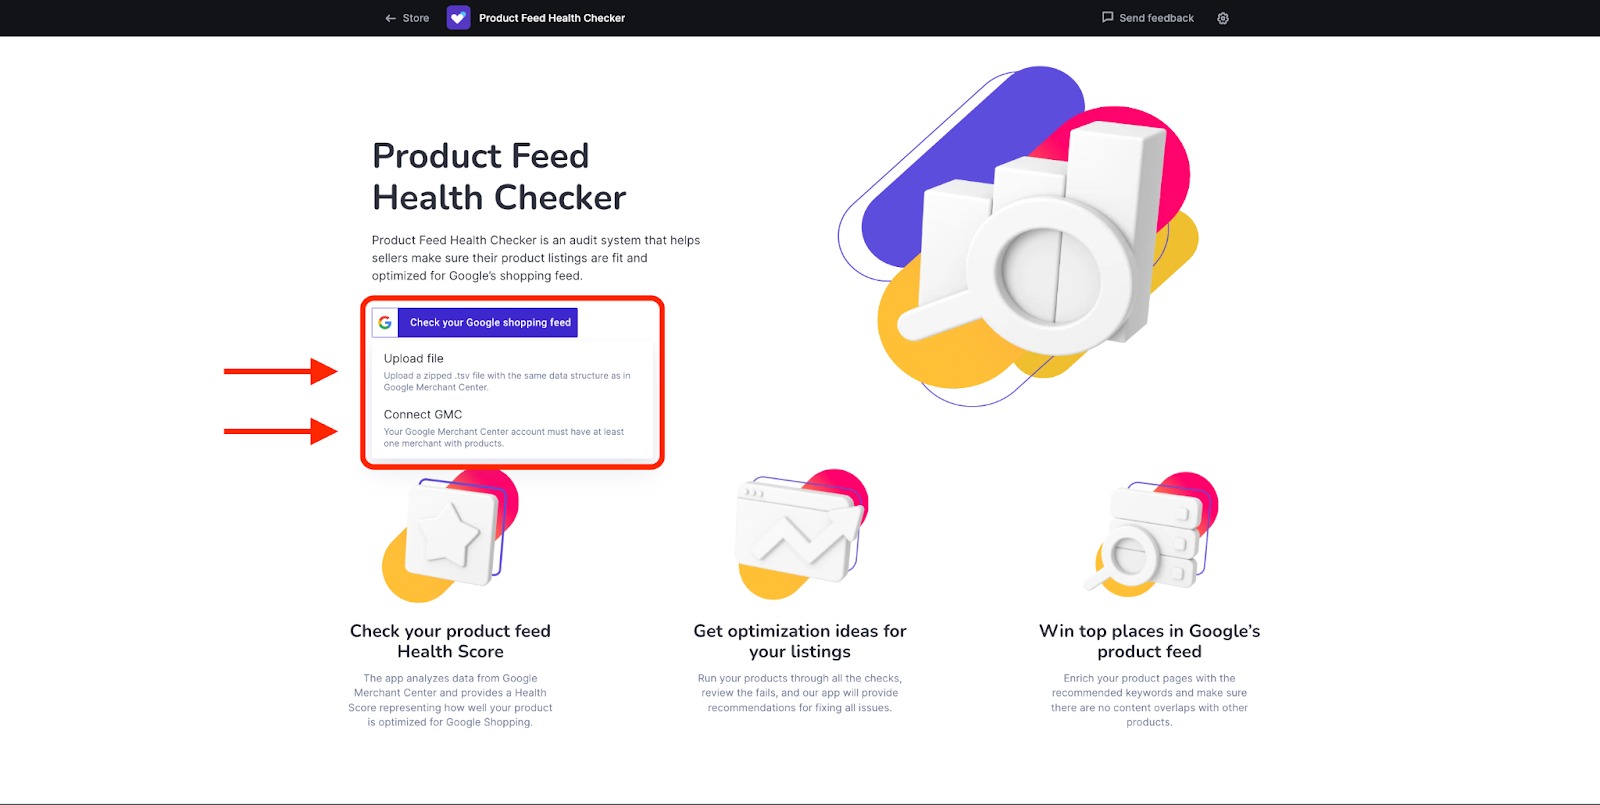 How to set up your Product Feed Health Checker account with a file or Google Merchant Center account.